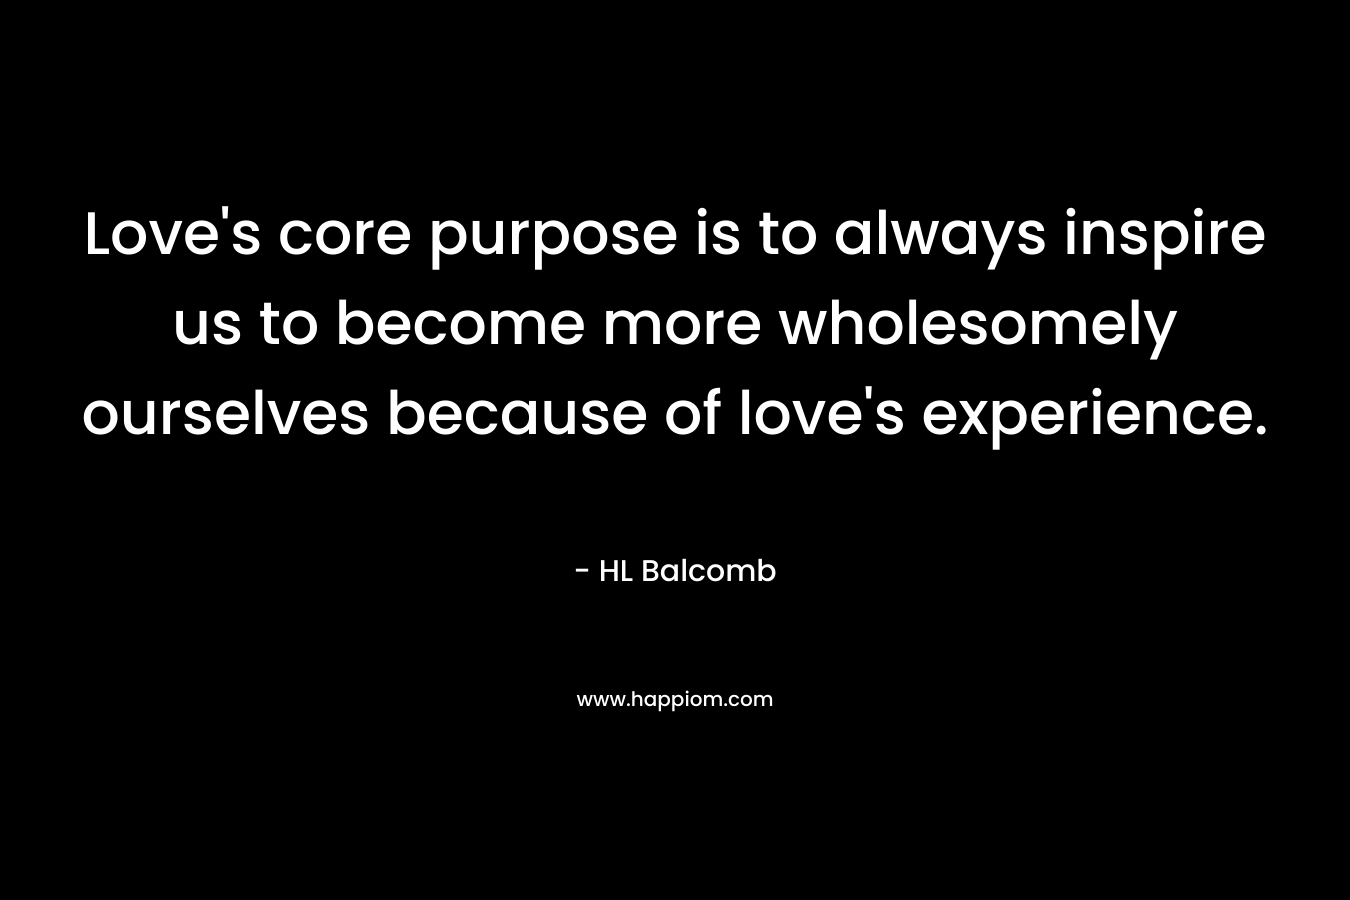 Love’s core purpose is to always inspire us to become more wholesomely ourselves because of love’s experience. – HL Balcomb